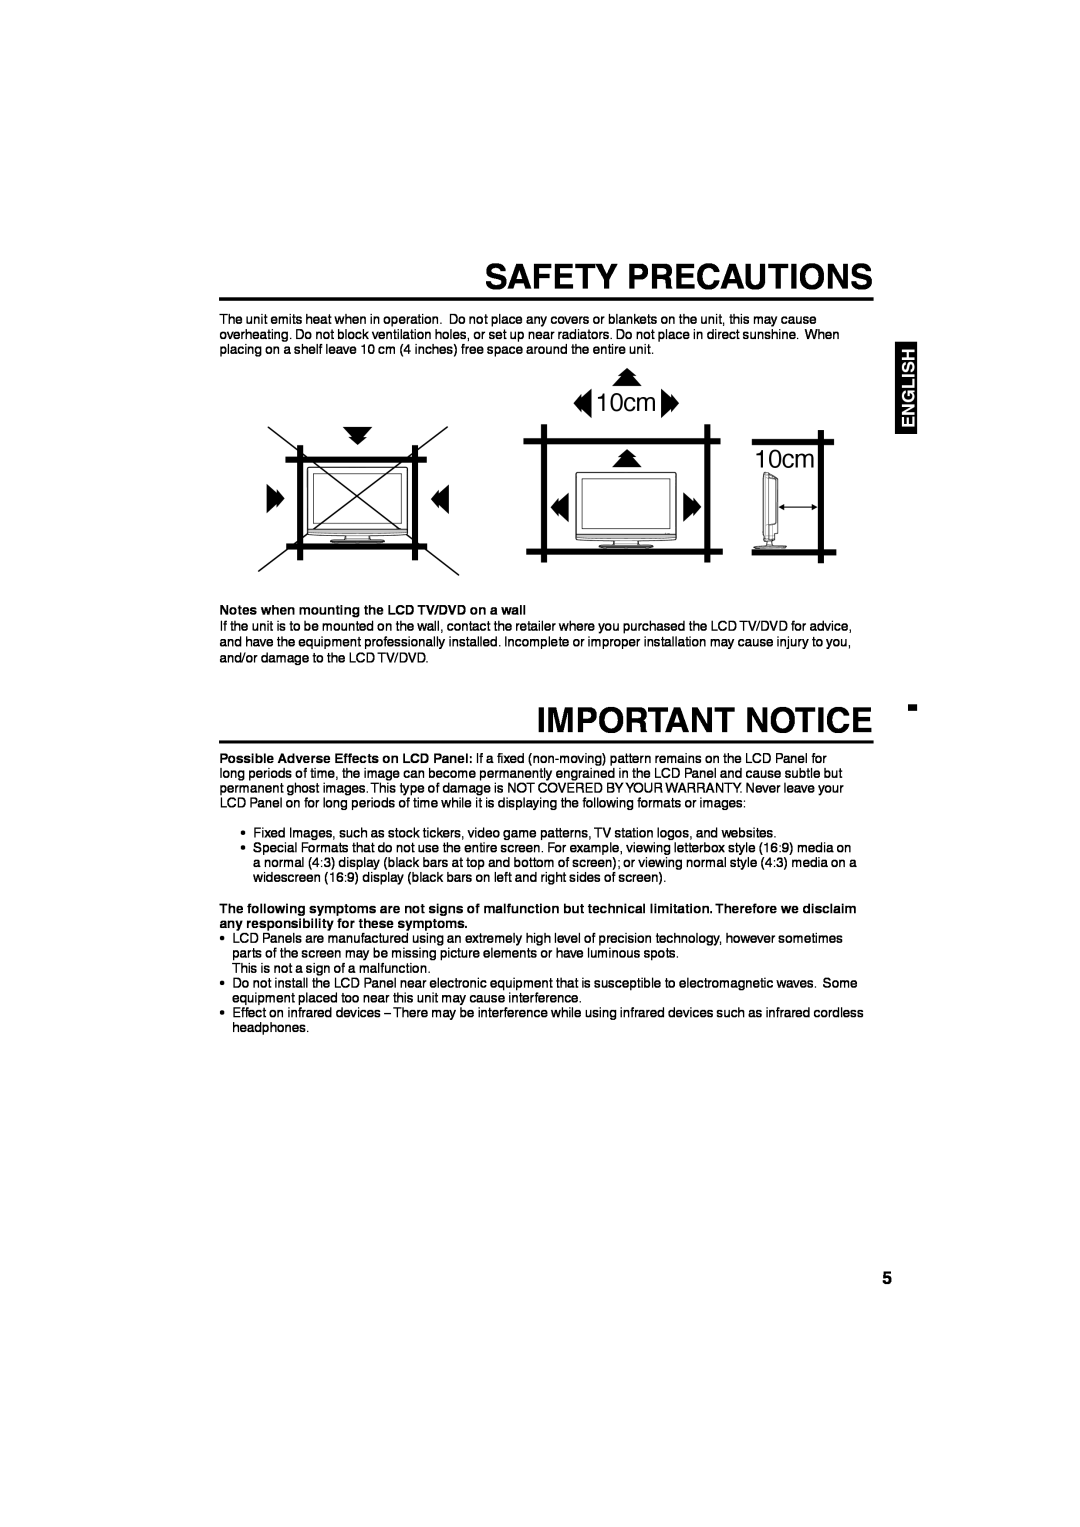 Sansui HDLCDVD265 Safety Precautions, Important Notice, 10cm 10cm, English, Notes when mounting the LCD TV/DVD on a wall 